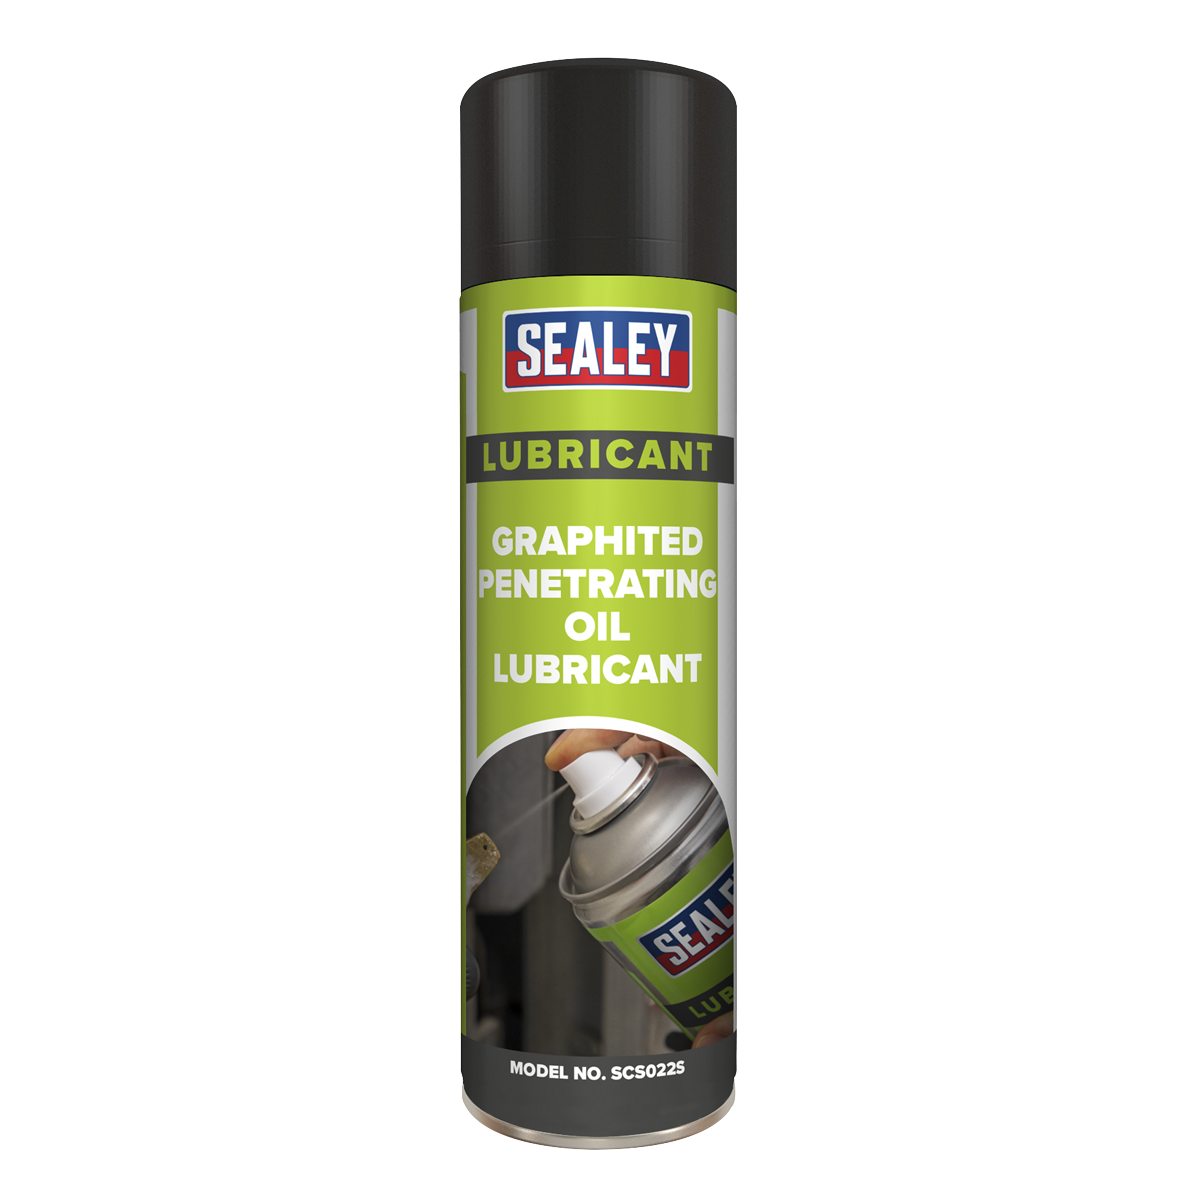 Sealey Graphited Penetrating Oil Lubricant 500ml